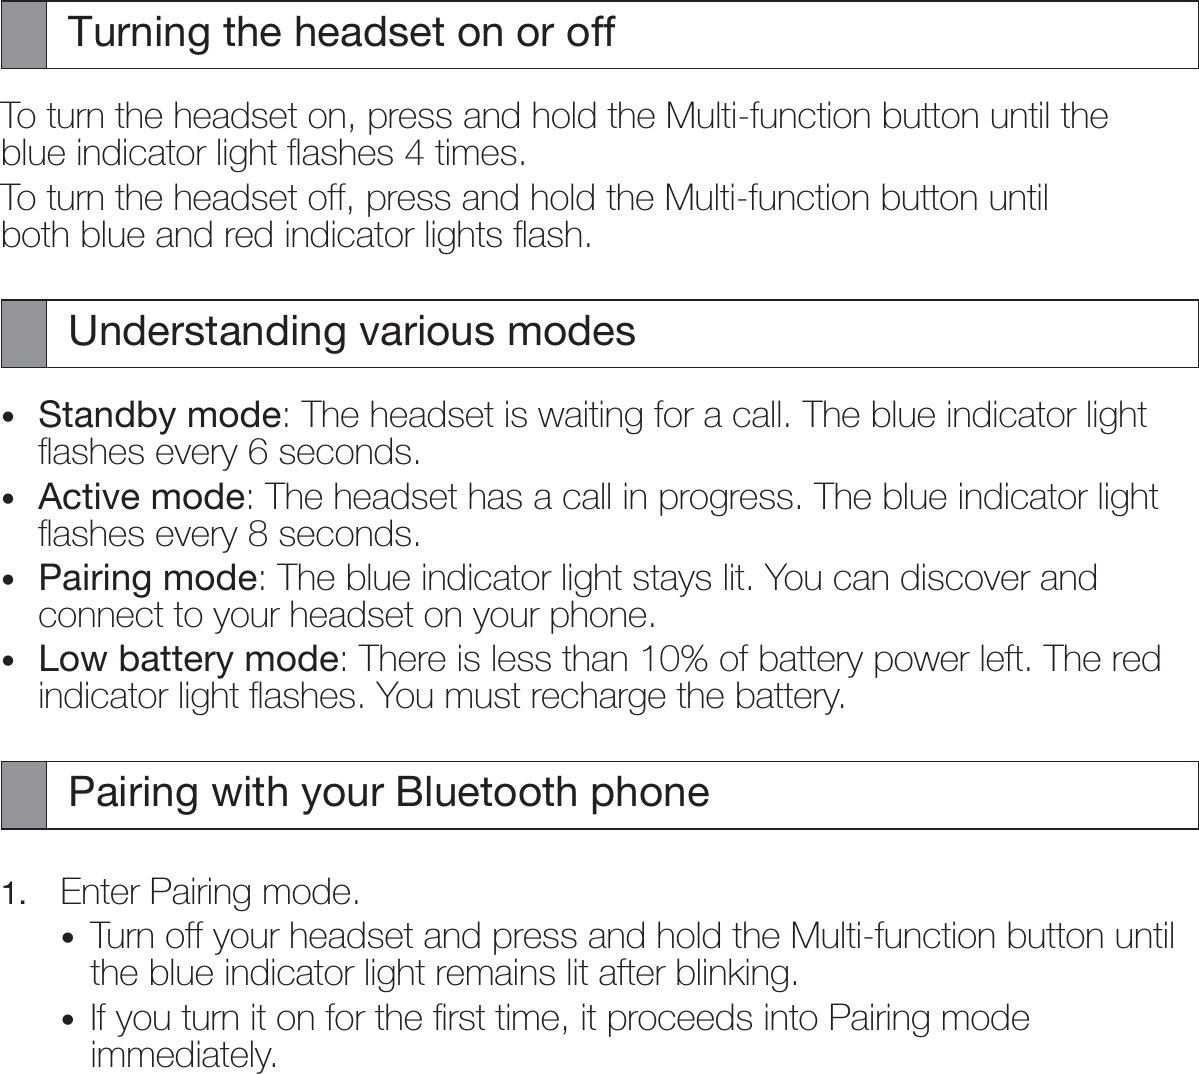 Turning the headset on or offTo turn the headset on, press and hold the Multi-function button until the blue indicator light ﬂashes 4 times.To turn the headset off, press and hold the Multi-function button until both blue and red indicator lights ﬂash.Understanding various modesStandby mode: The headset is waiting for a call. The blue indicator light ﬂashes every 6 seconds.Active mode: The headset has a call in progress. The blue indicator light ﬂashes every 8 seconds.Pairing mode: The blue indicator light stays lit. You can discover and connect to your headset on your phone.Low battery mode: There is less than 10% of battery power left. The red indicator light ﬂashes. You must recharge the battery.Pairing with your Bluetooth phone1.  Enter Pairing mode.Turn off your headset and press and hold the Multi-function button until the blue indicator light remains lit after blinking.If you turn it on for the ﬁrst time, it proceeds into Pairing mode immediately.••••••